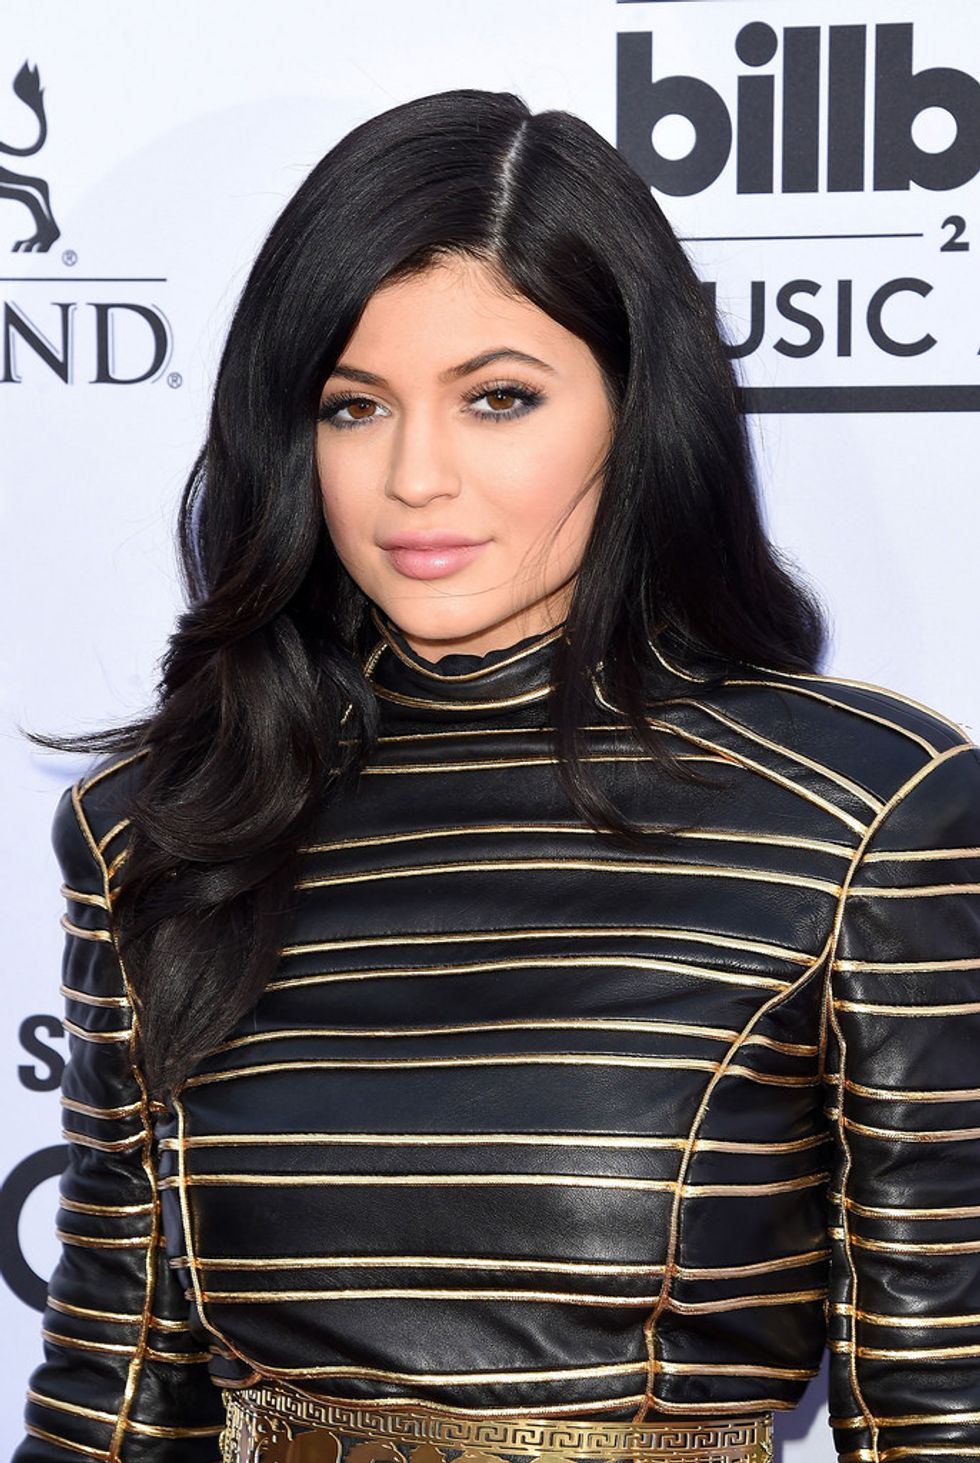 Is Kylie Jenner Really "Self-Made"?